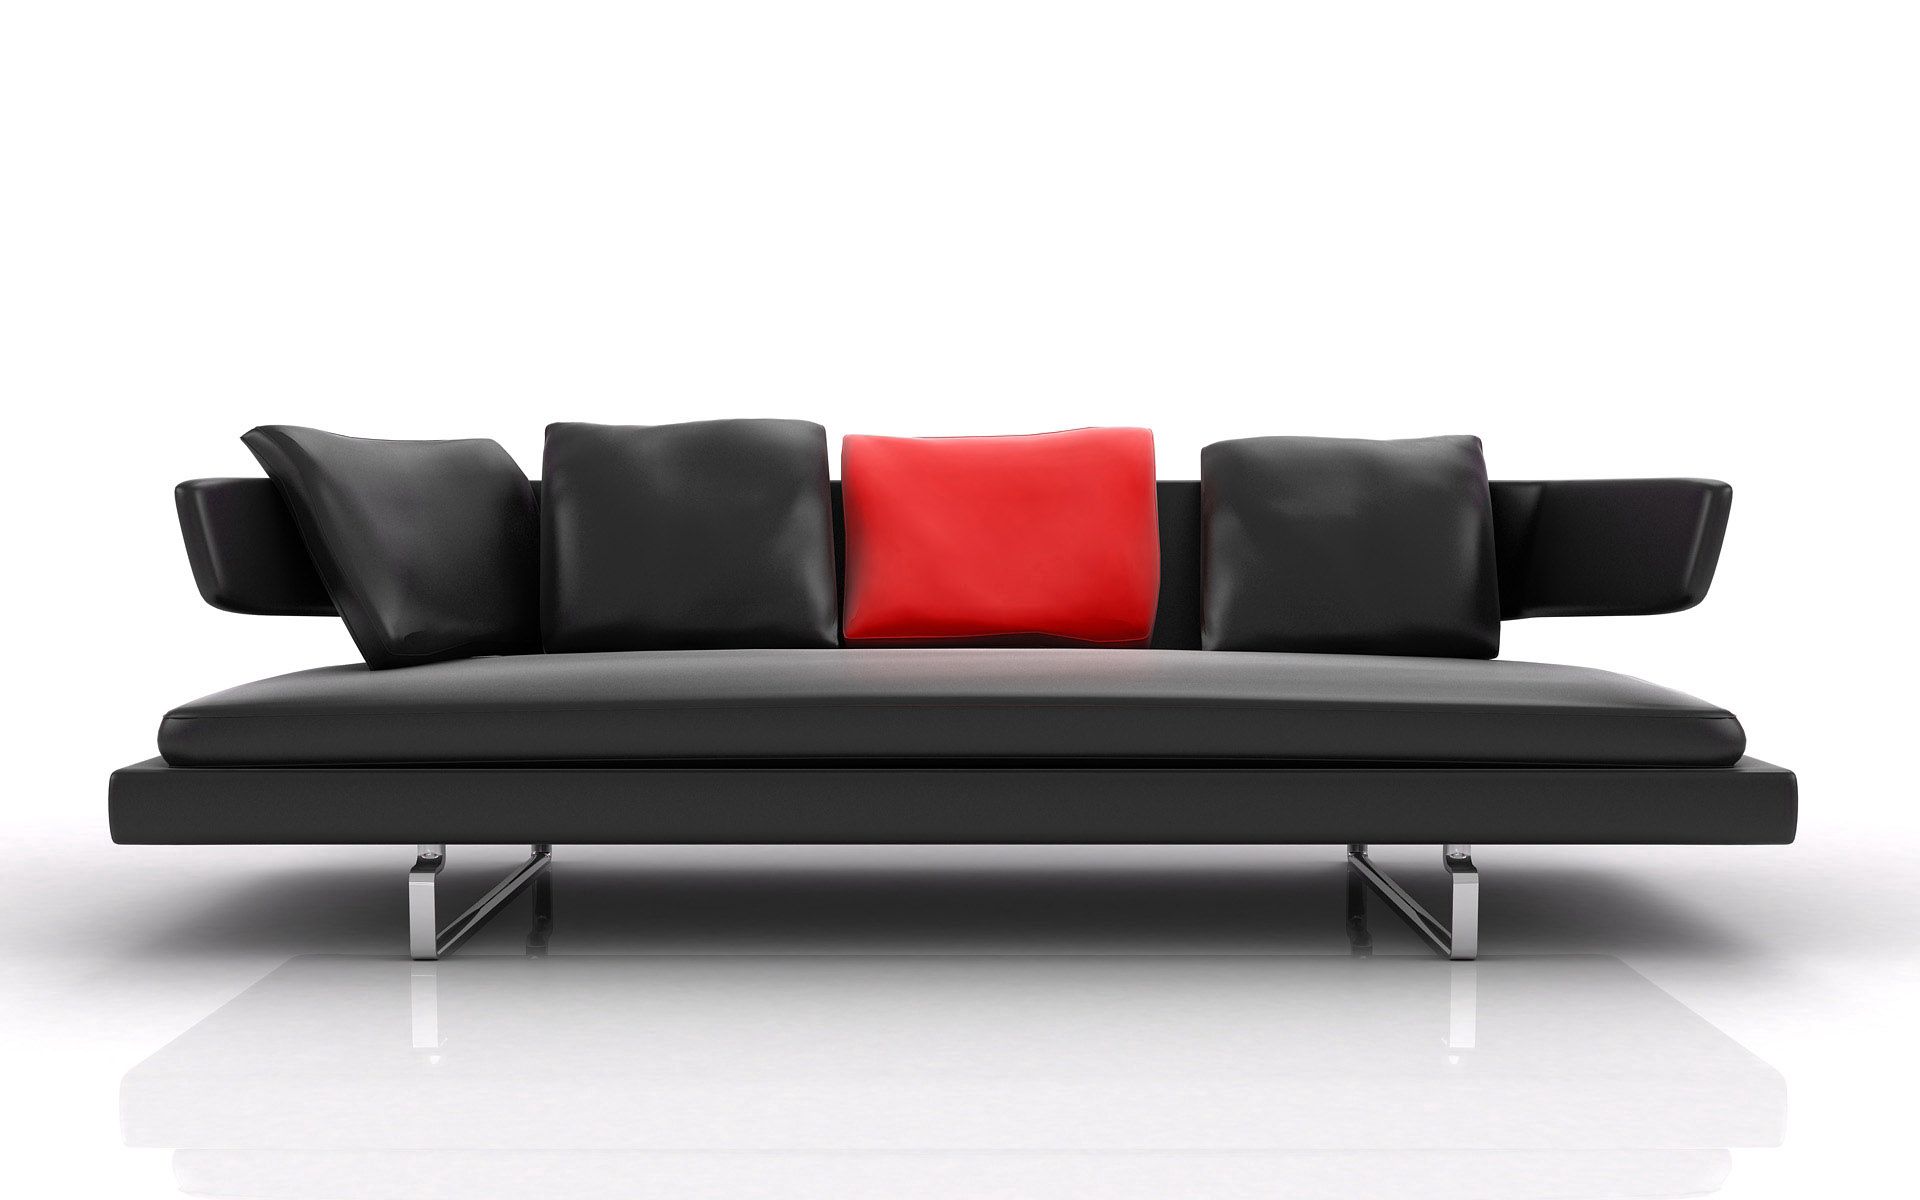 miscellanea, miscellaneous, style, sofa, furniture, modern, up to date, cushions, pillows